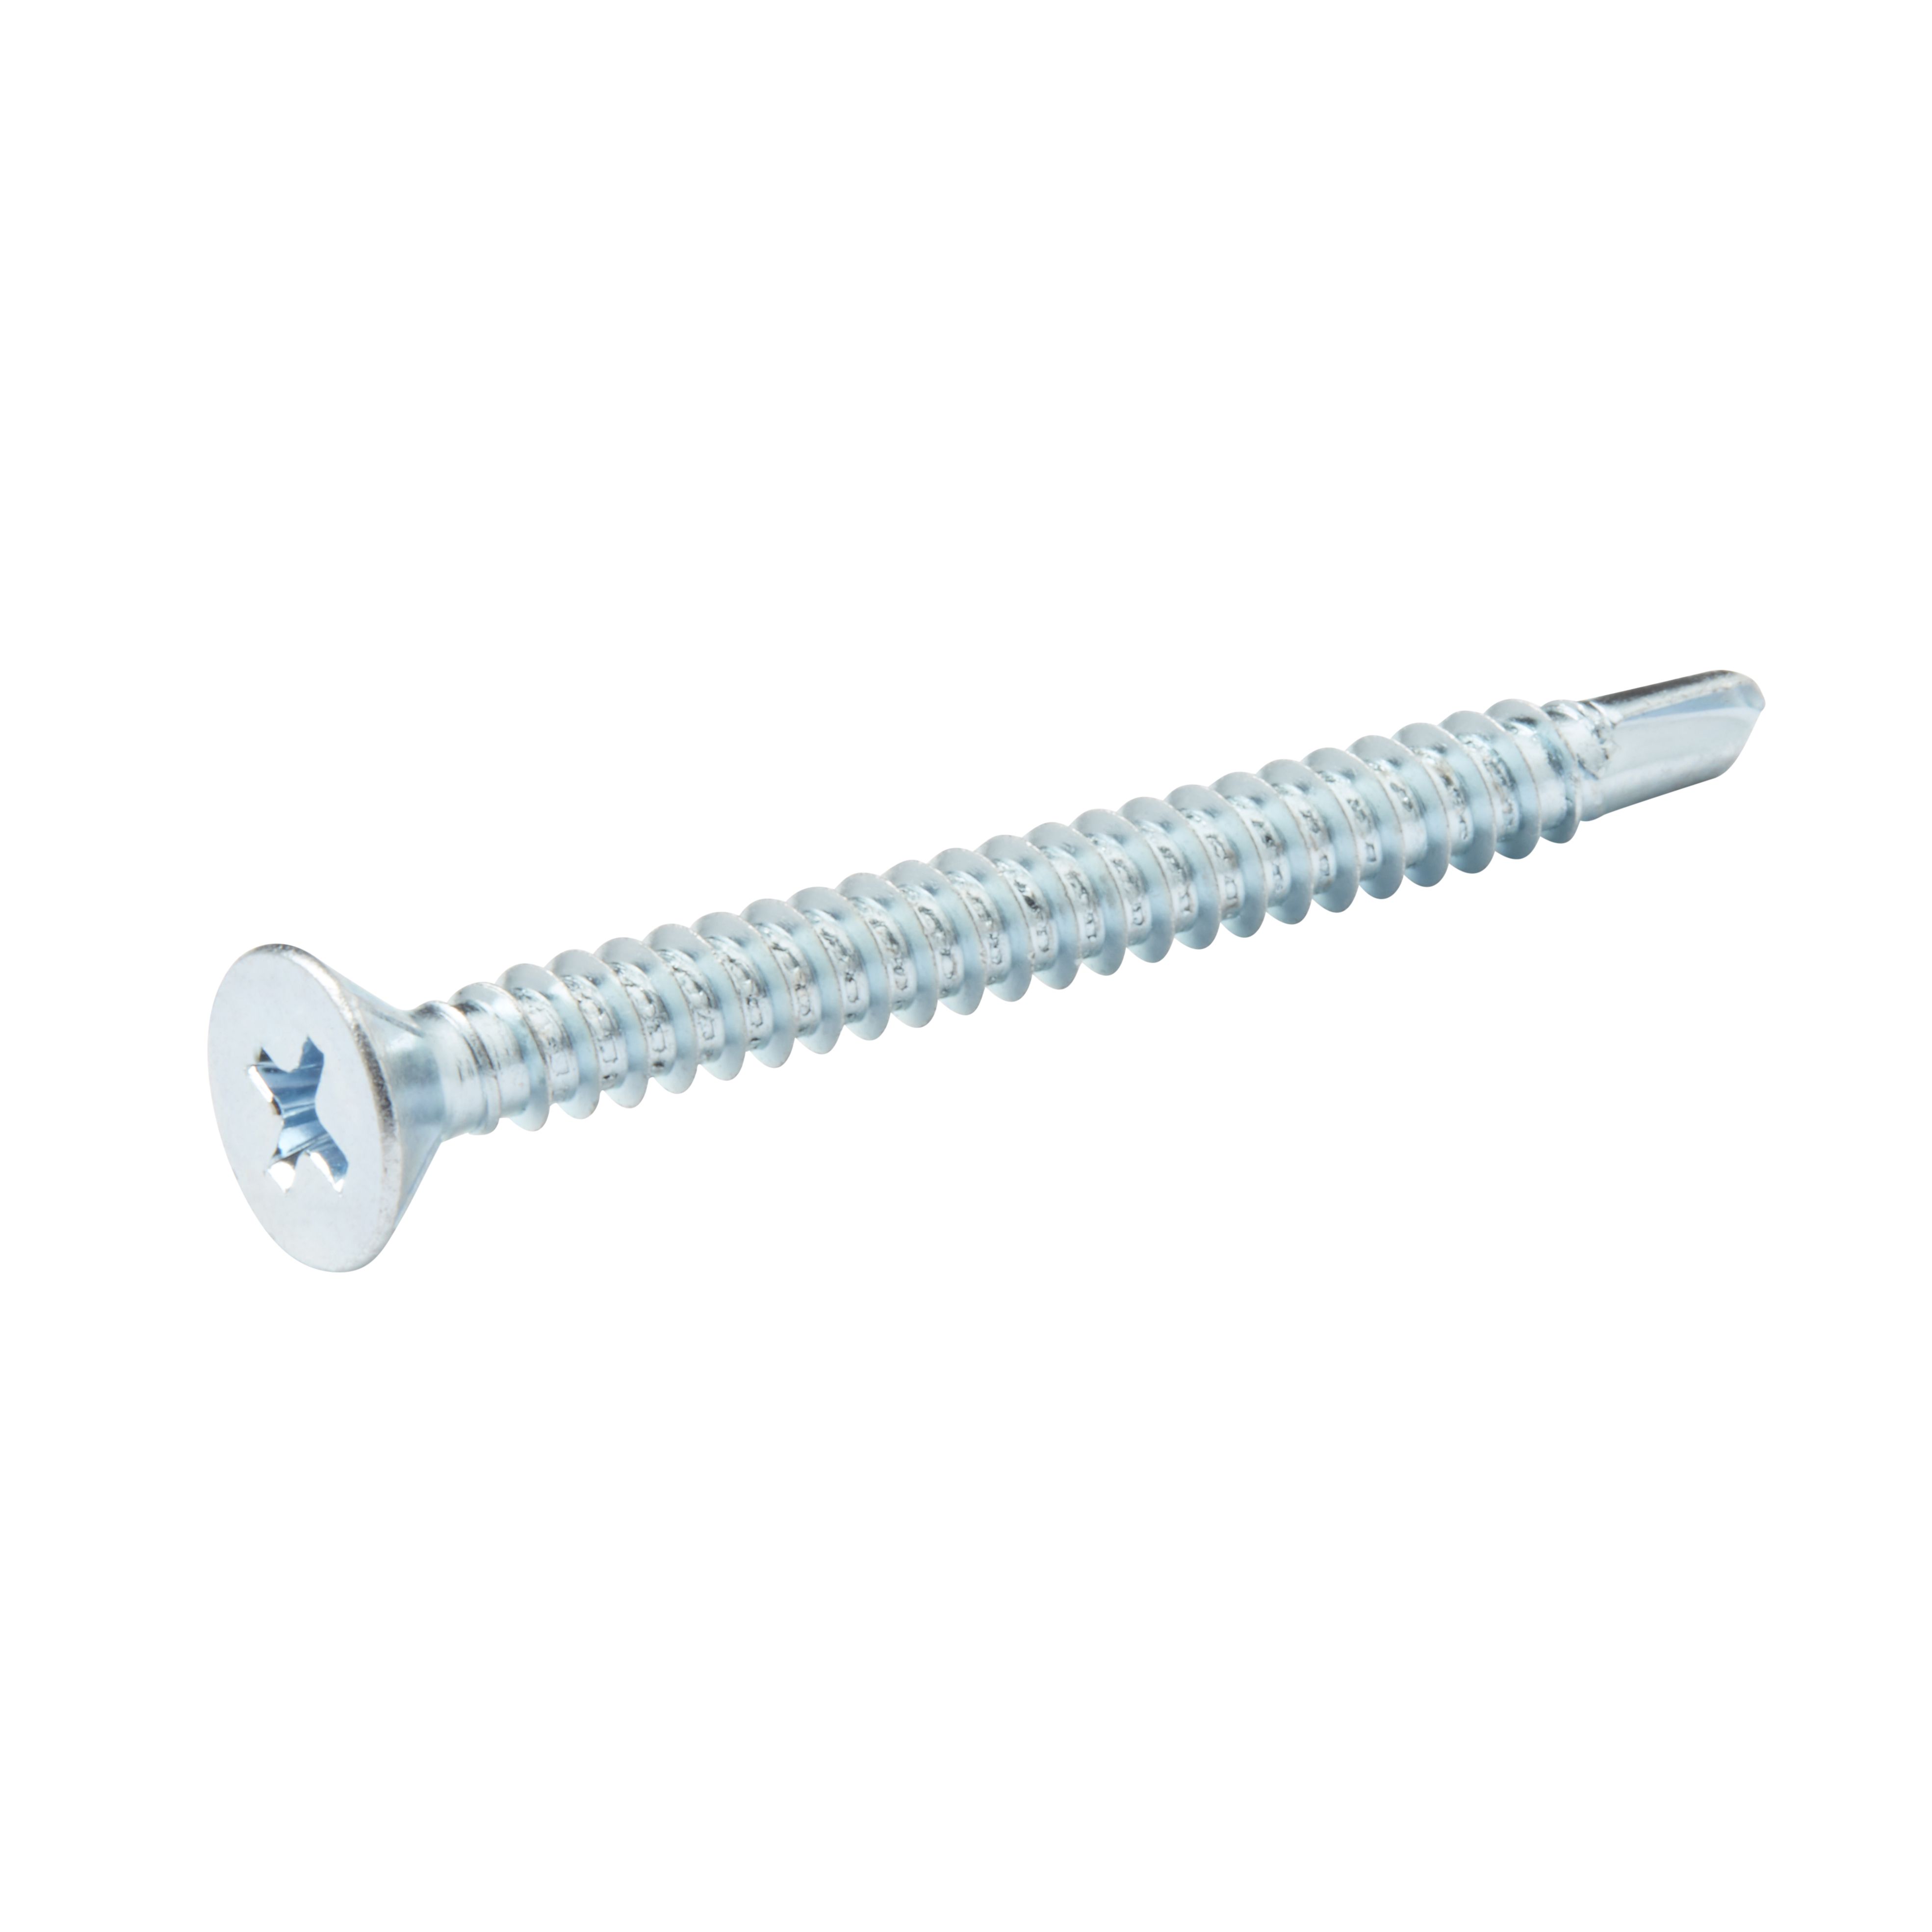 Diall Phillips Countersunk Zinc-plated Carbon steel (C1022) Self-drilling screw (Dia)4.8mm (L)50mm, Pack of 25